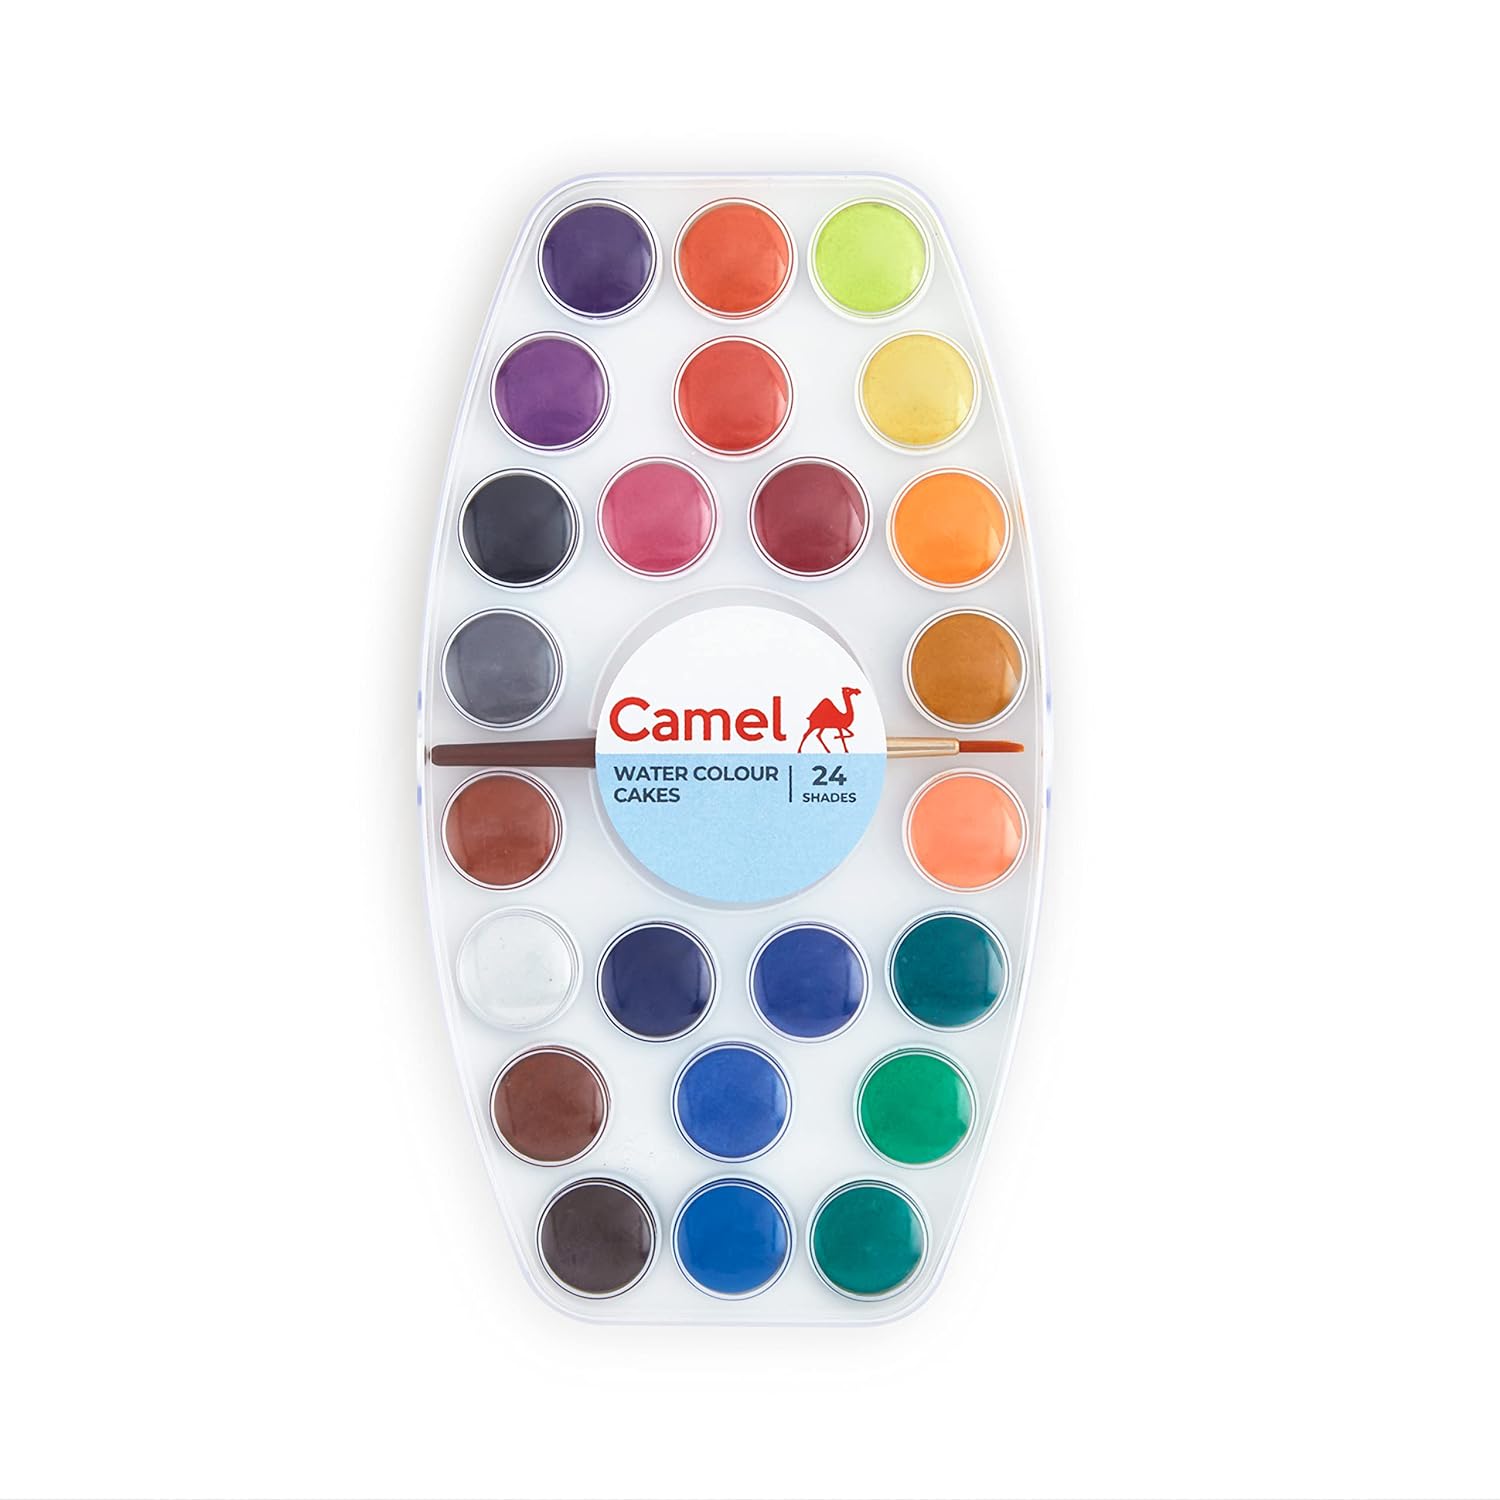 Camlin 18 Shades Artists Water Colour Cake with Brush free shipping | eBay